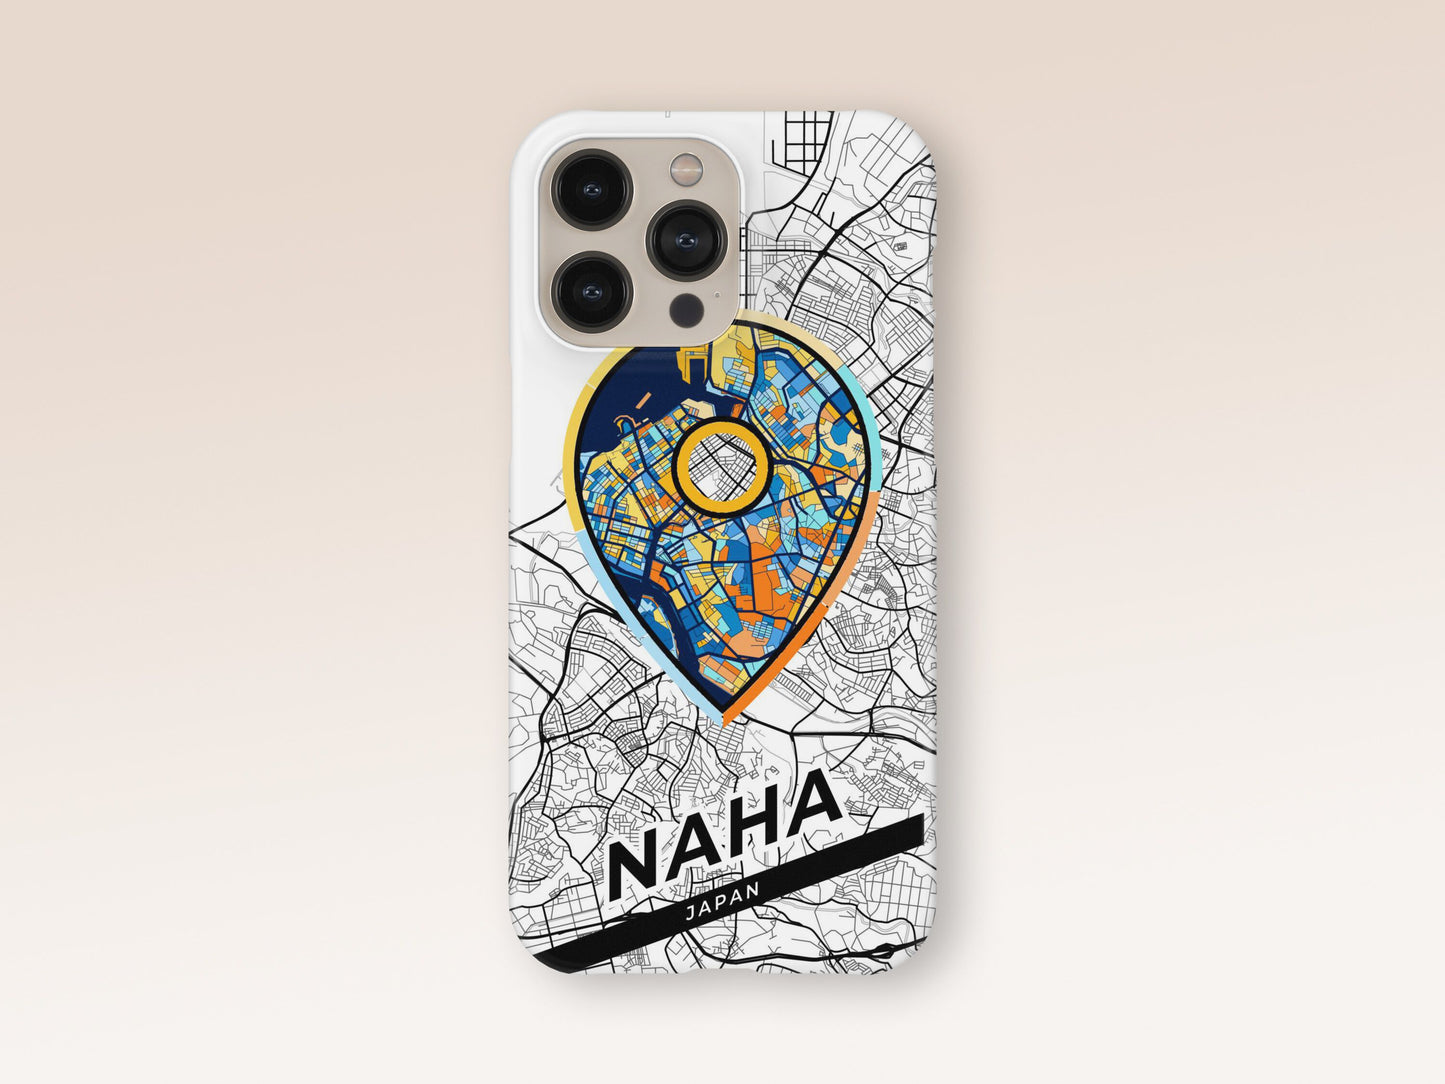 Naha Japan slim phone case with colorful icon. Birthday, wedding or housewarming gift. Couple match cases. 1